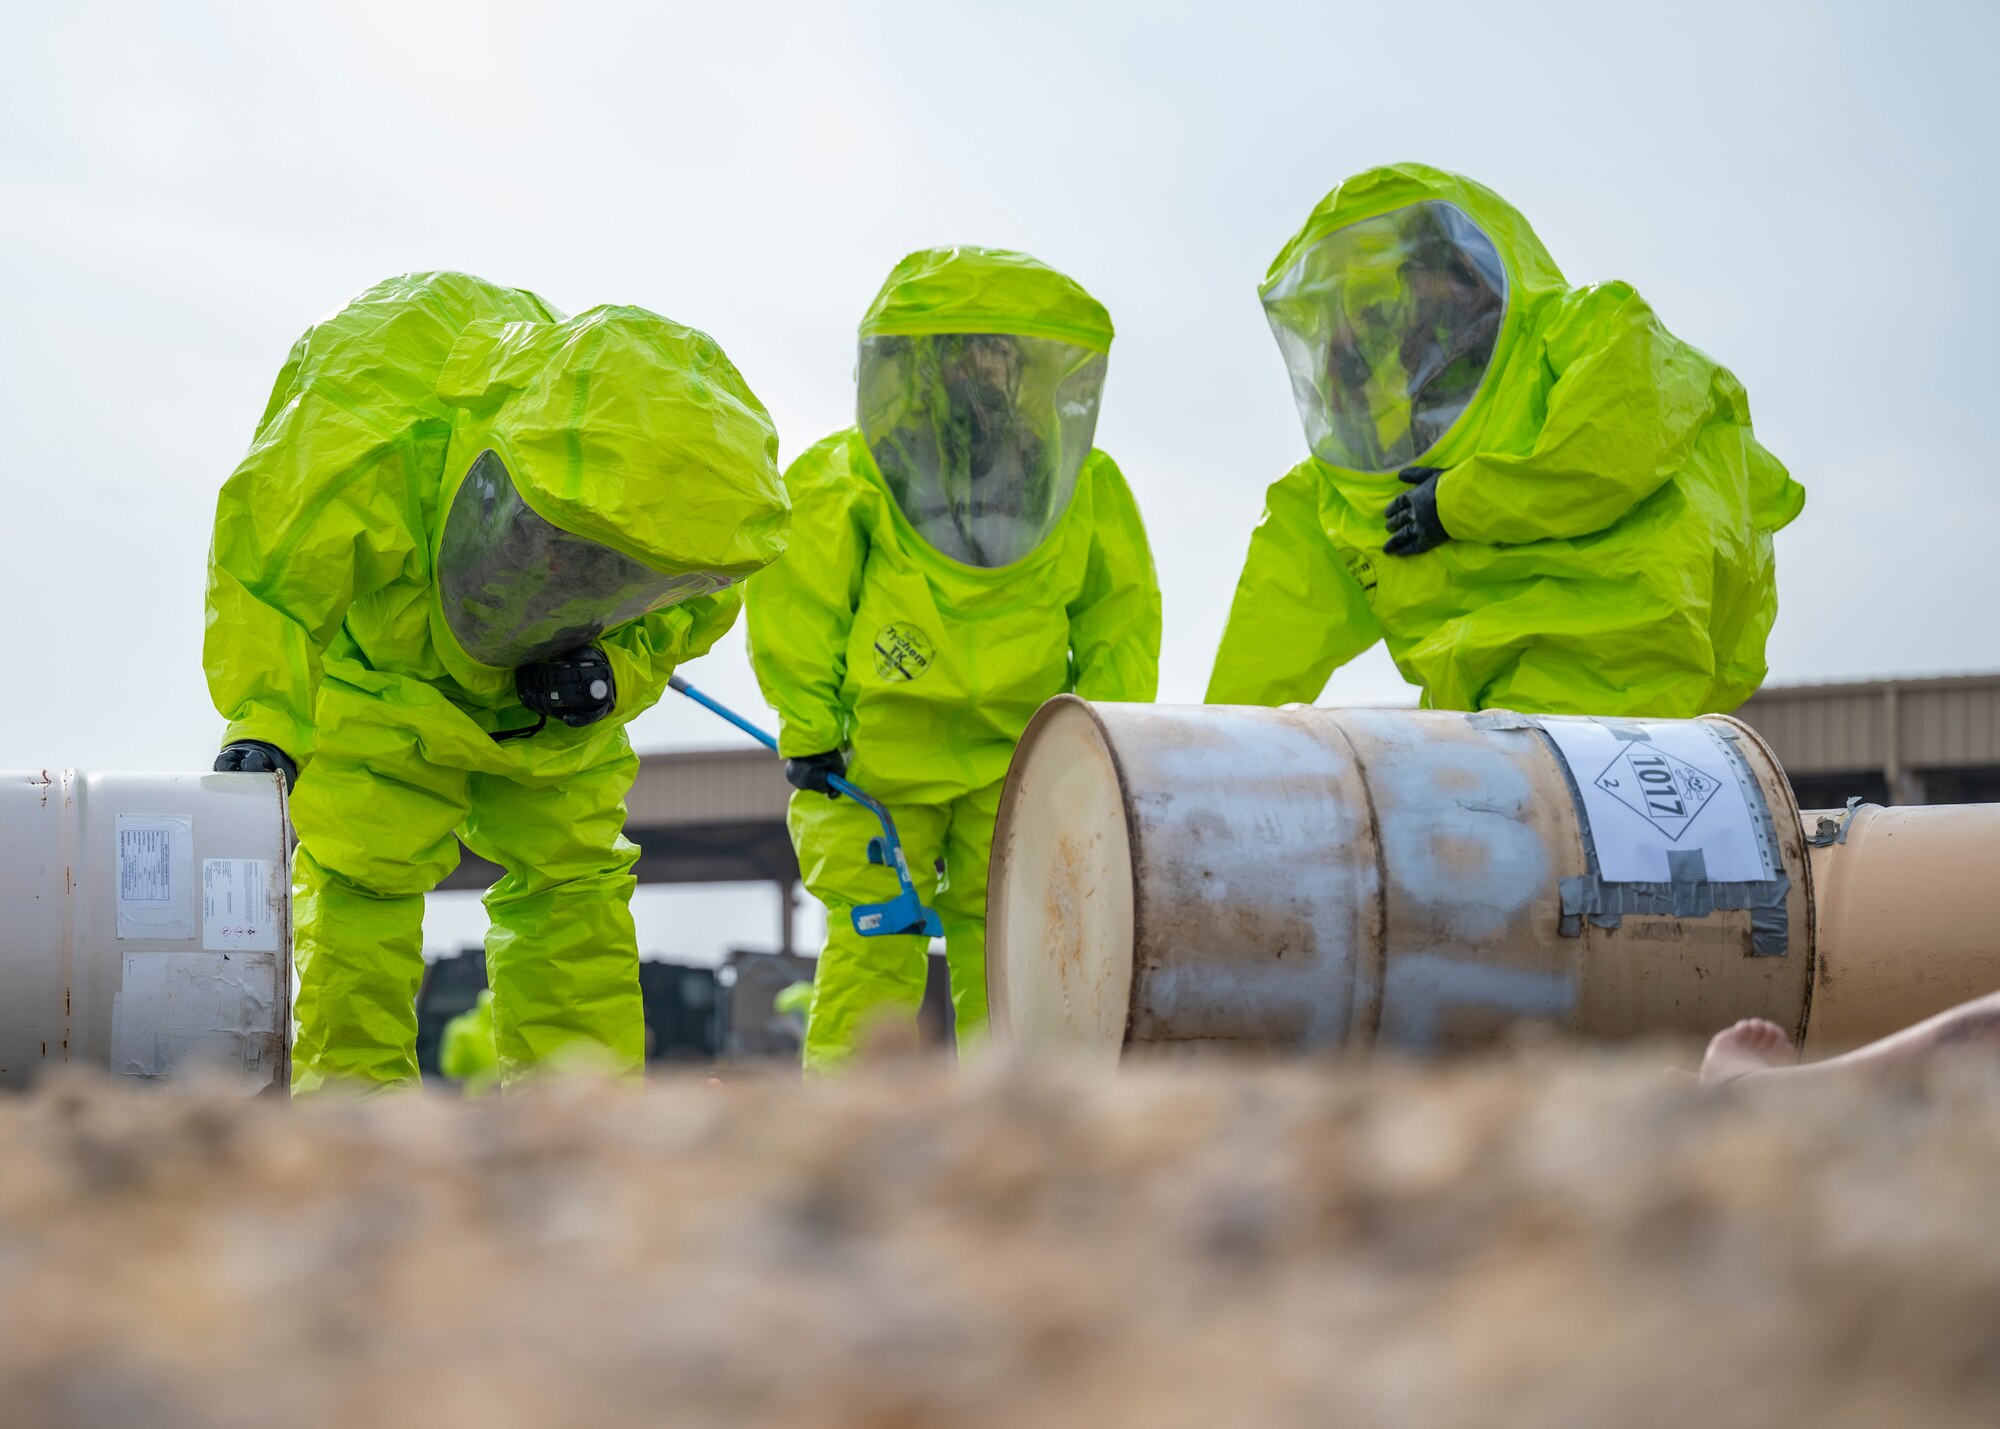 The 386th ECES Fire Department completed a practical exam for the Department of Defense HAZMAT Technician program which involved over 100 hours of instruction and 16 hours of hands-on training for each student.